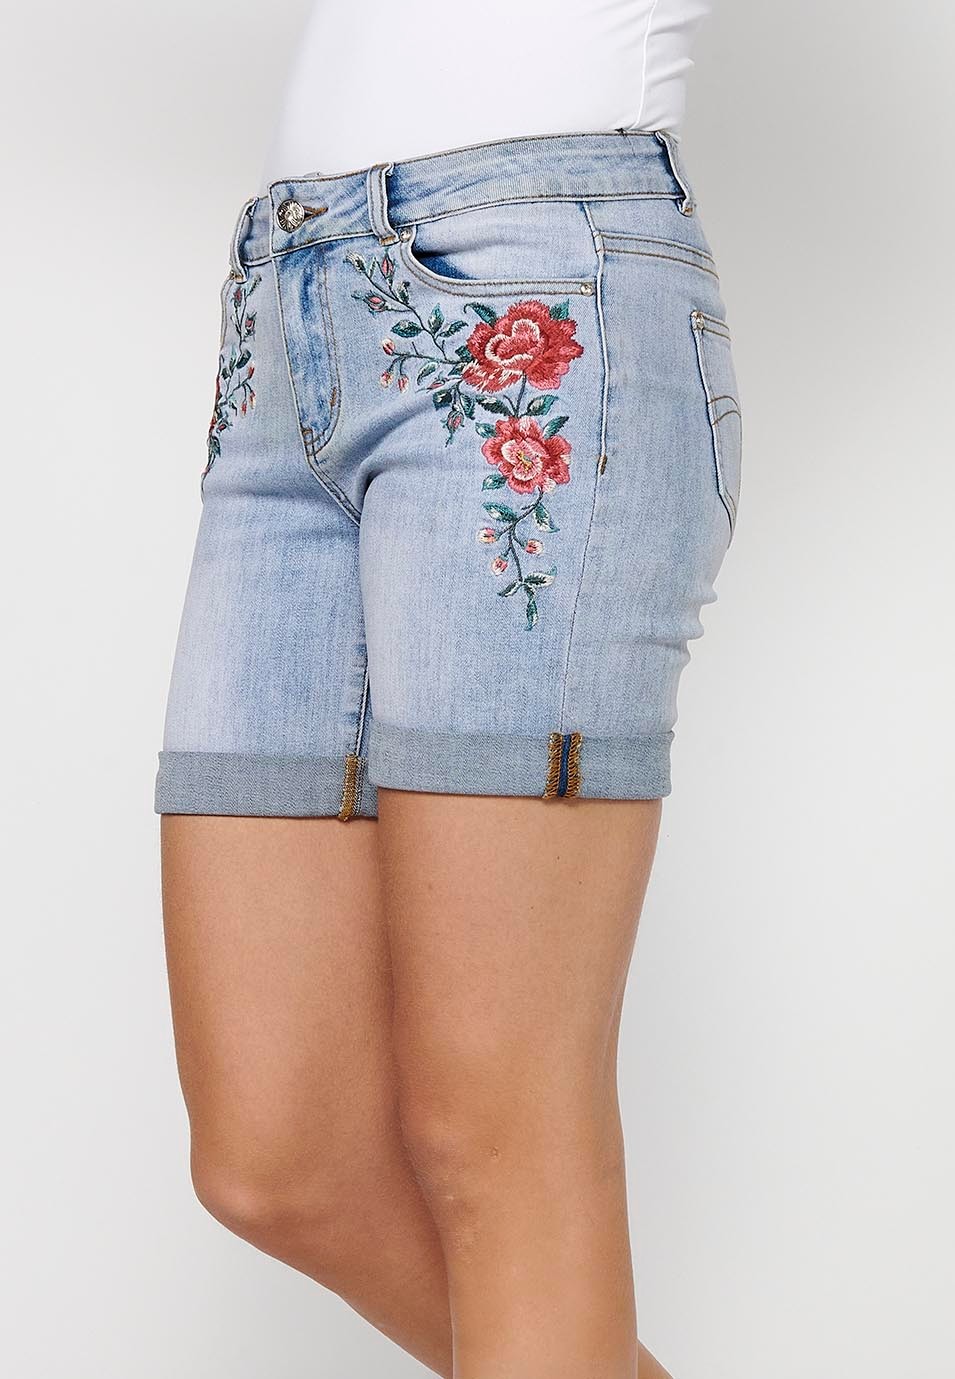 Denim shorts with front zipper and button closure and front floral embroidered details with five pockets, one blue pocket pocket for women 1